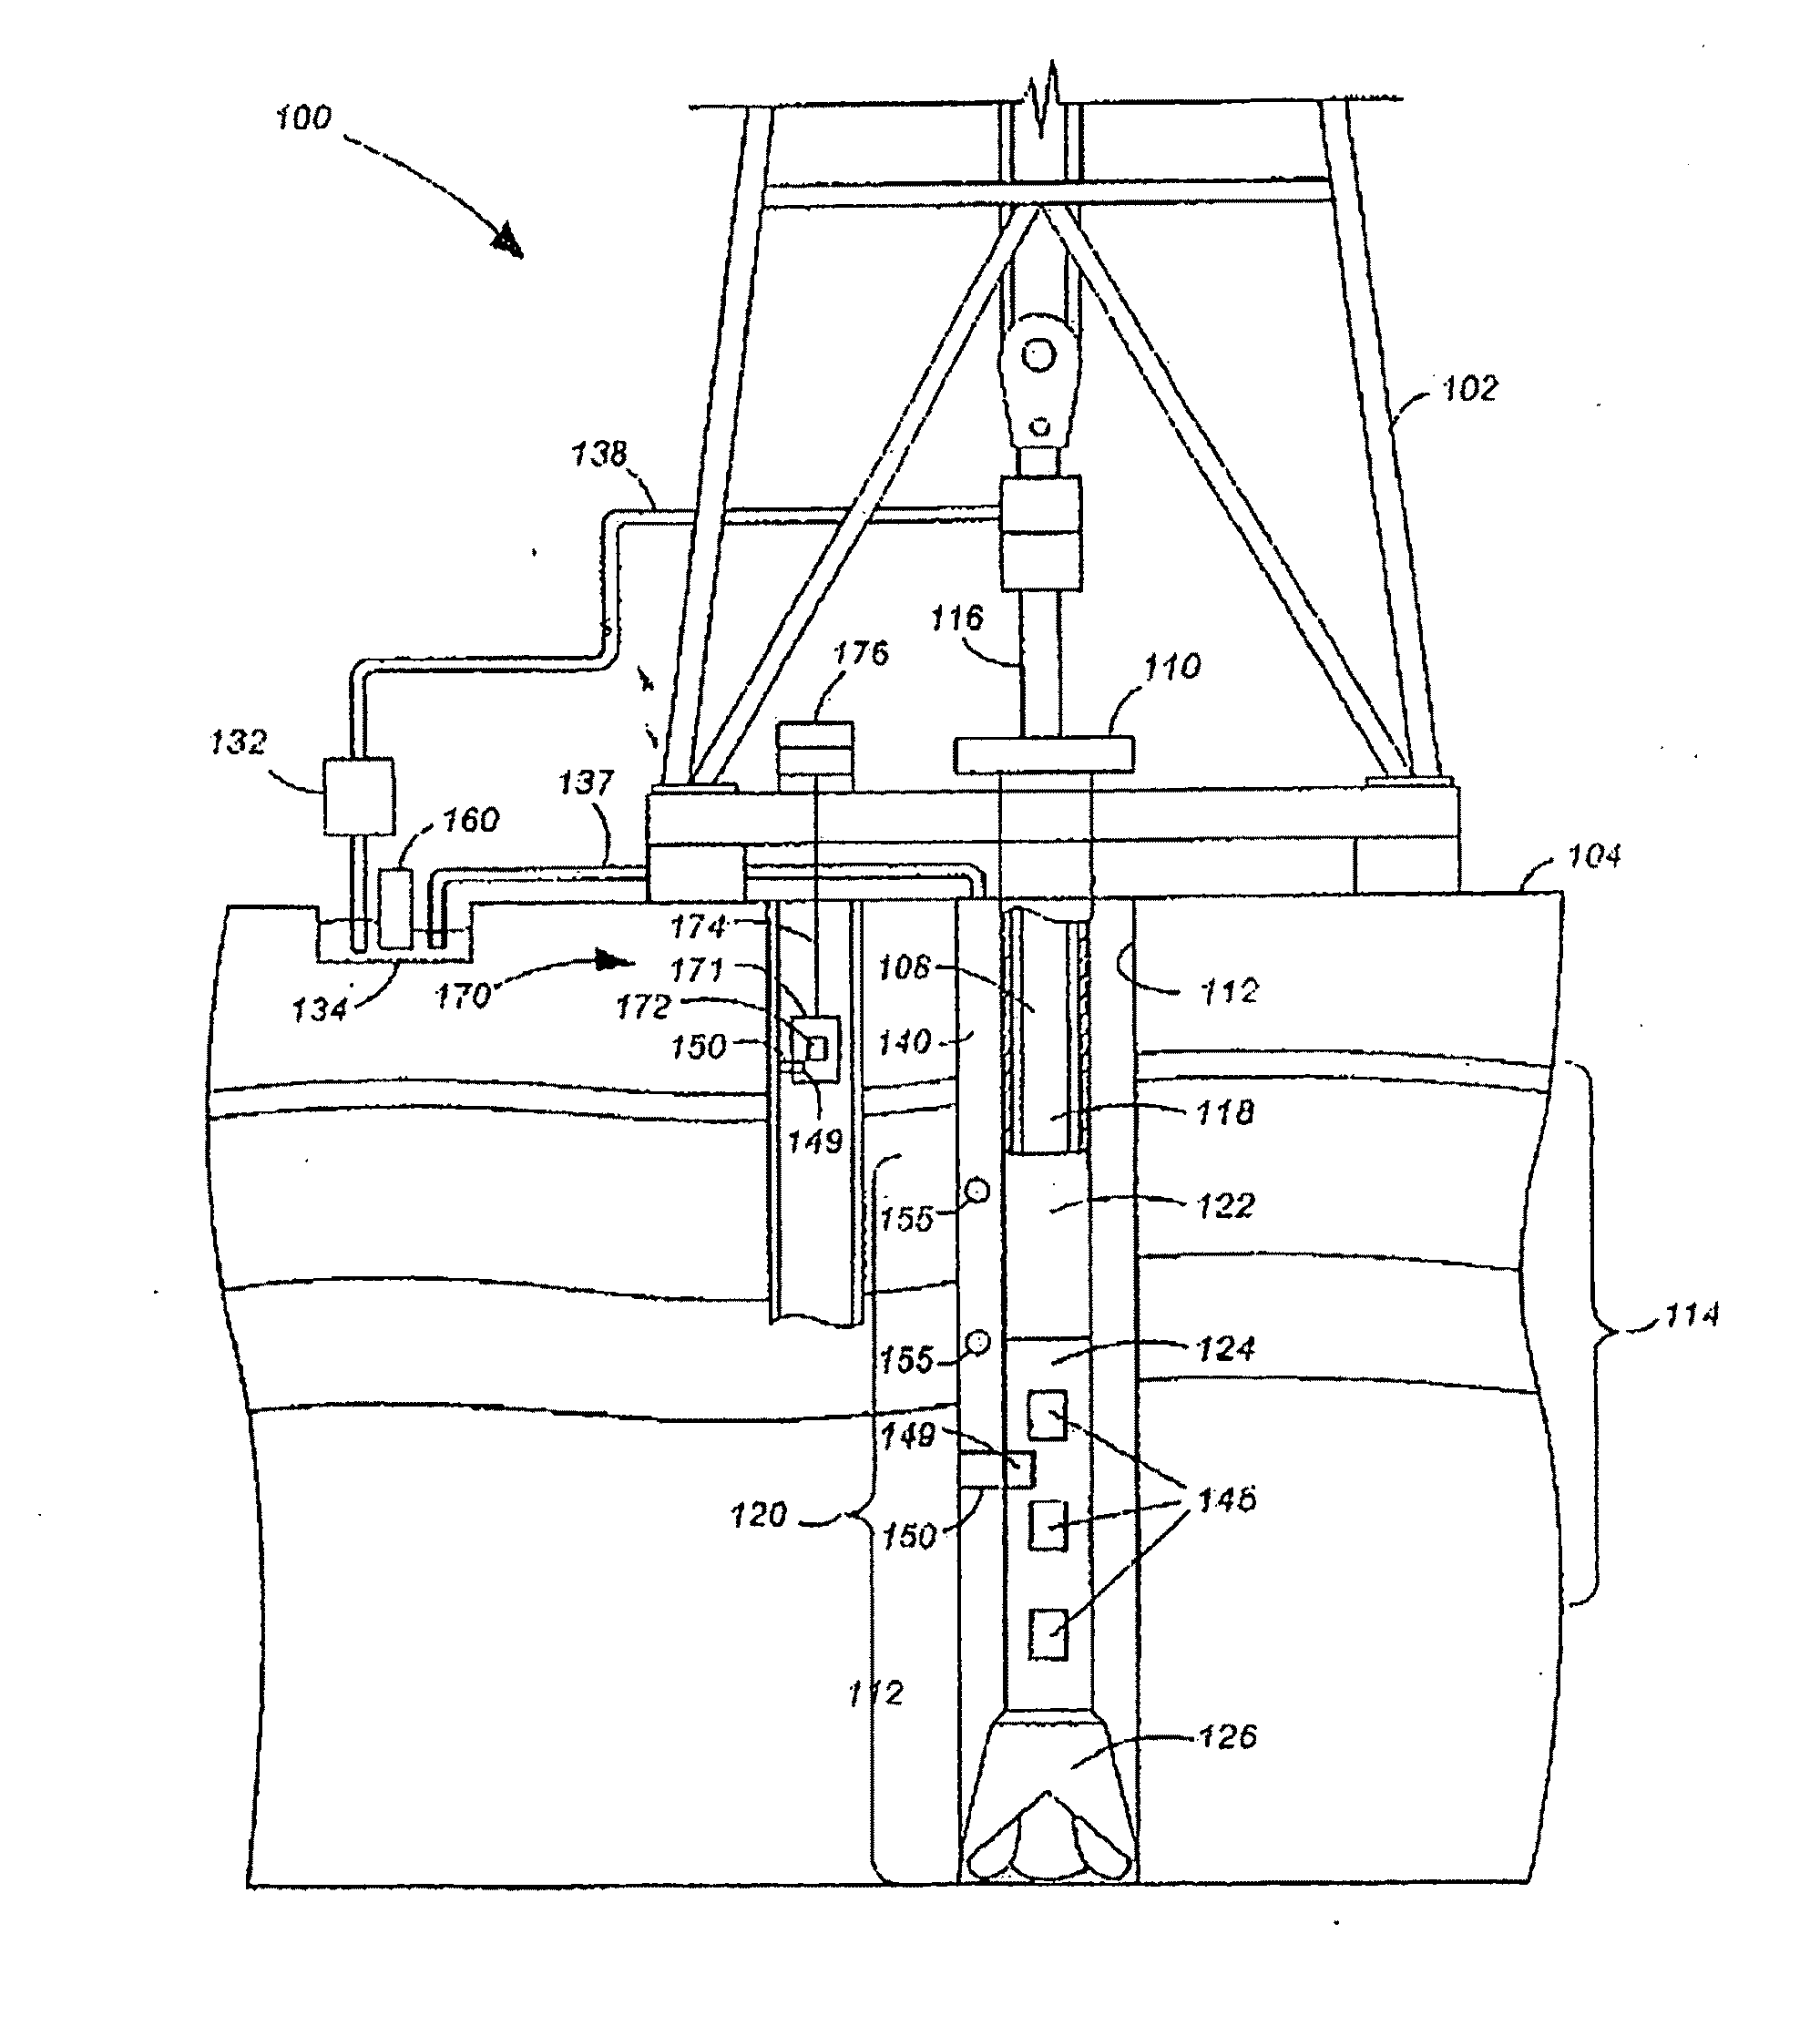 Apparatus and method for fluid property measurements